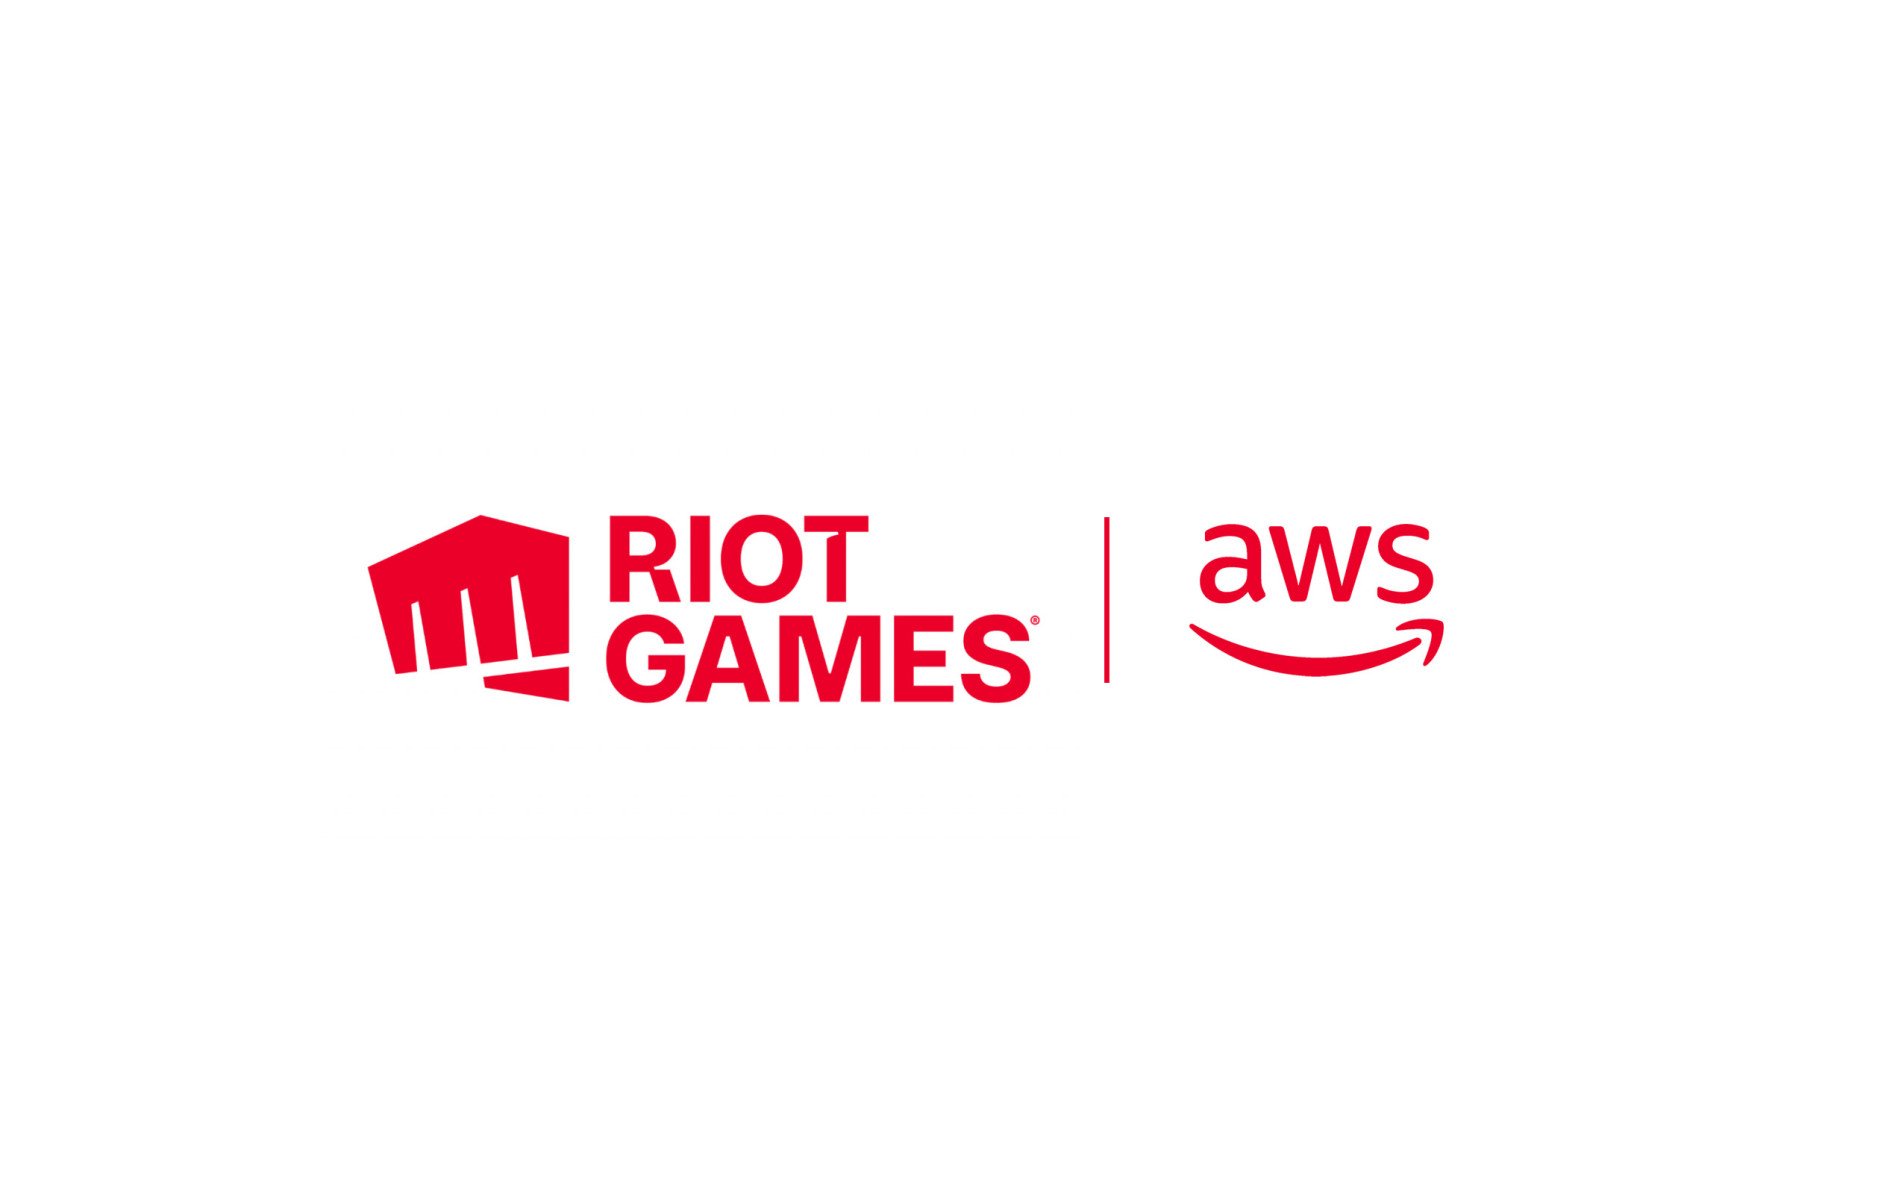 Prime Gaming and Riot Games Run it Back